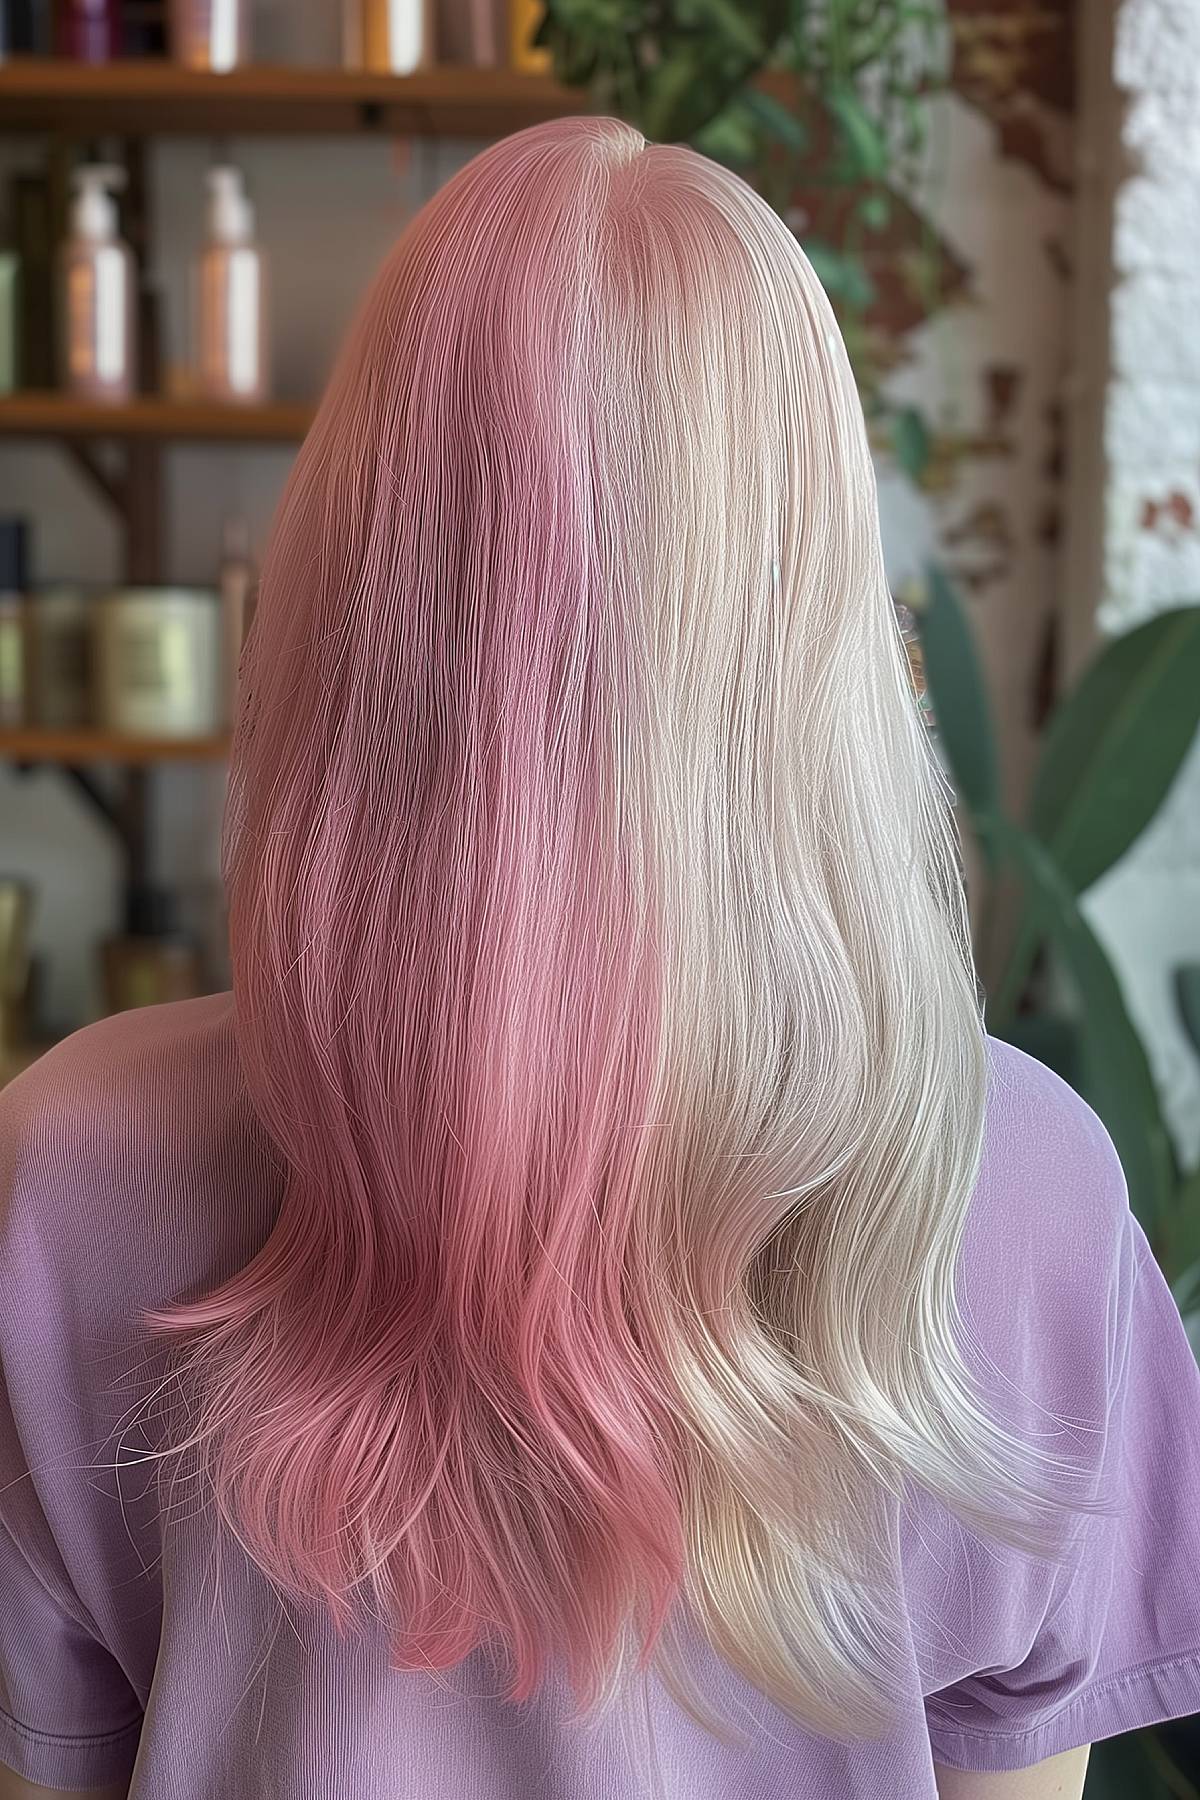 Mid-length hair with a soft split-dye in baby pink and blonde, perfect for a subtle Gemini-inspired look.